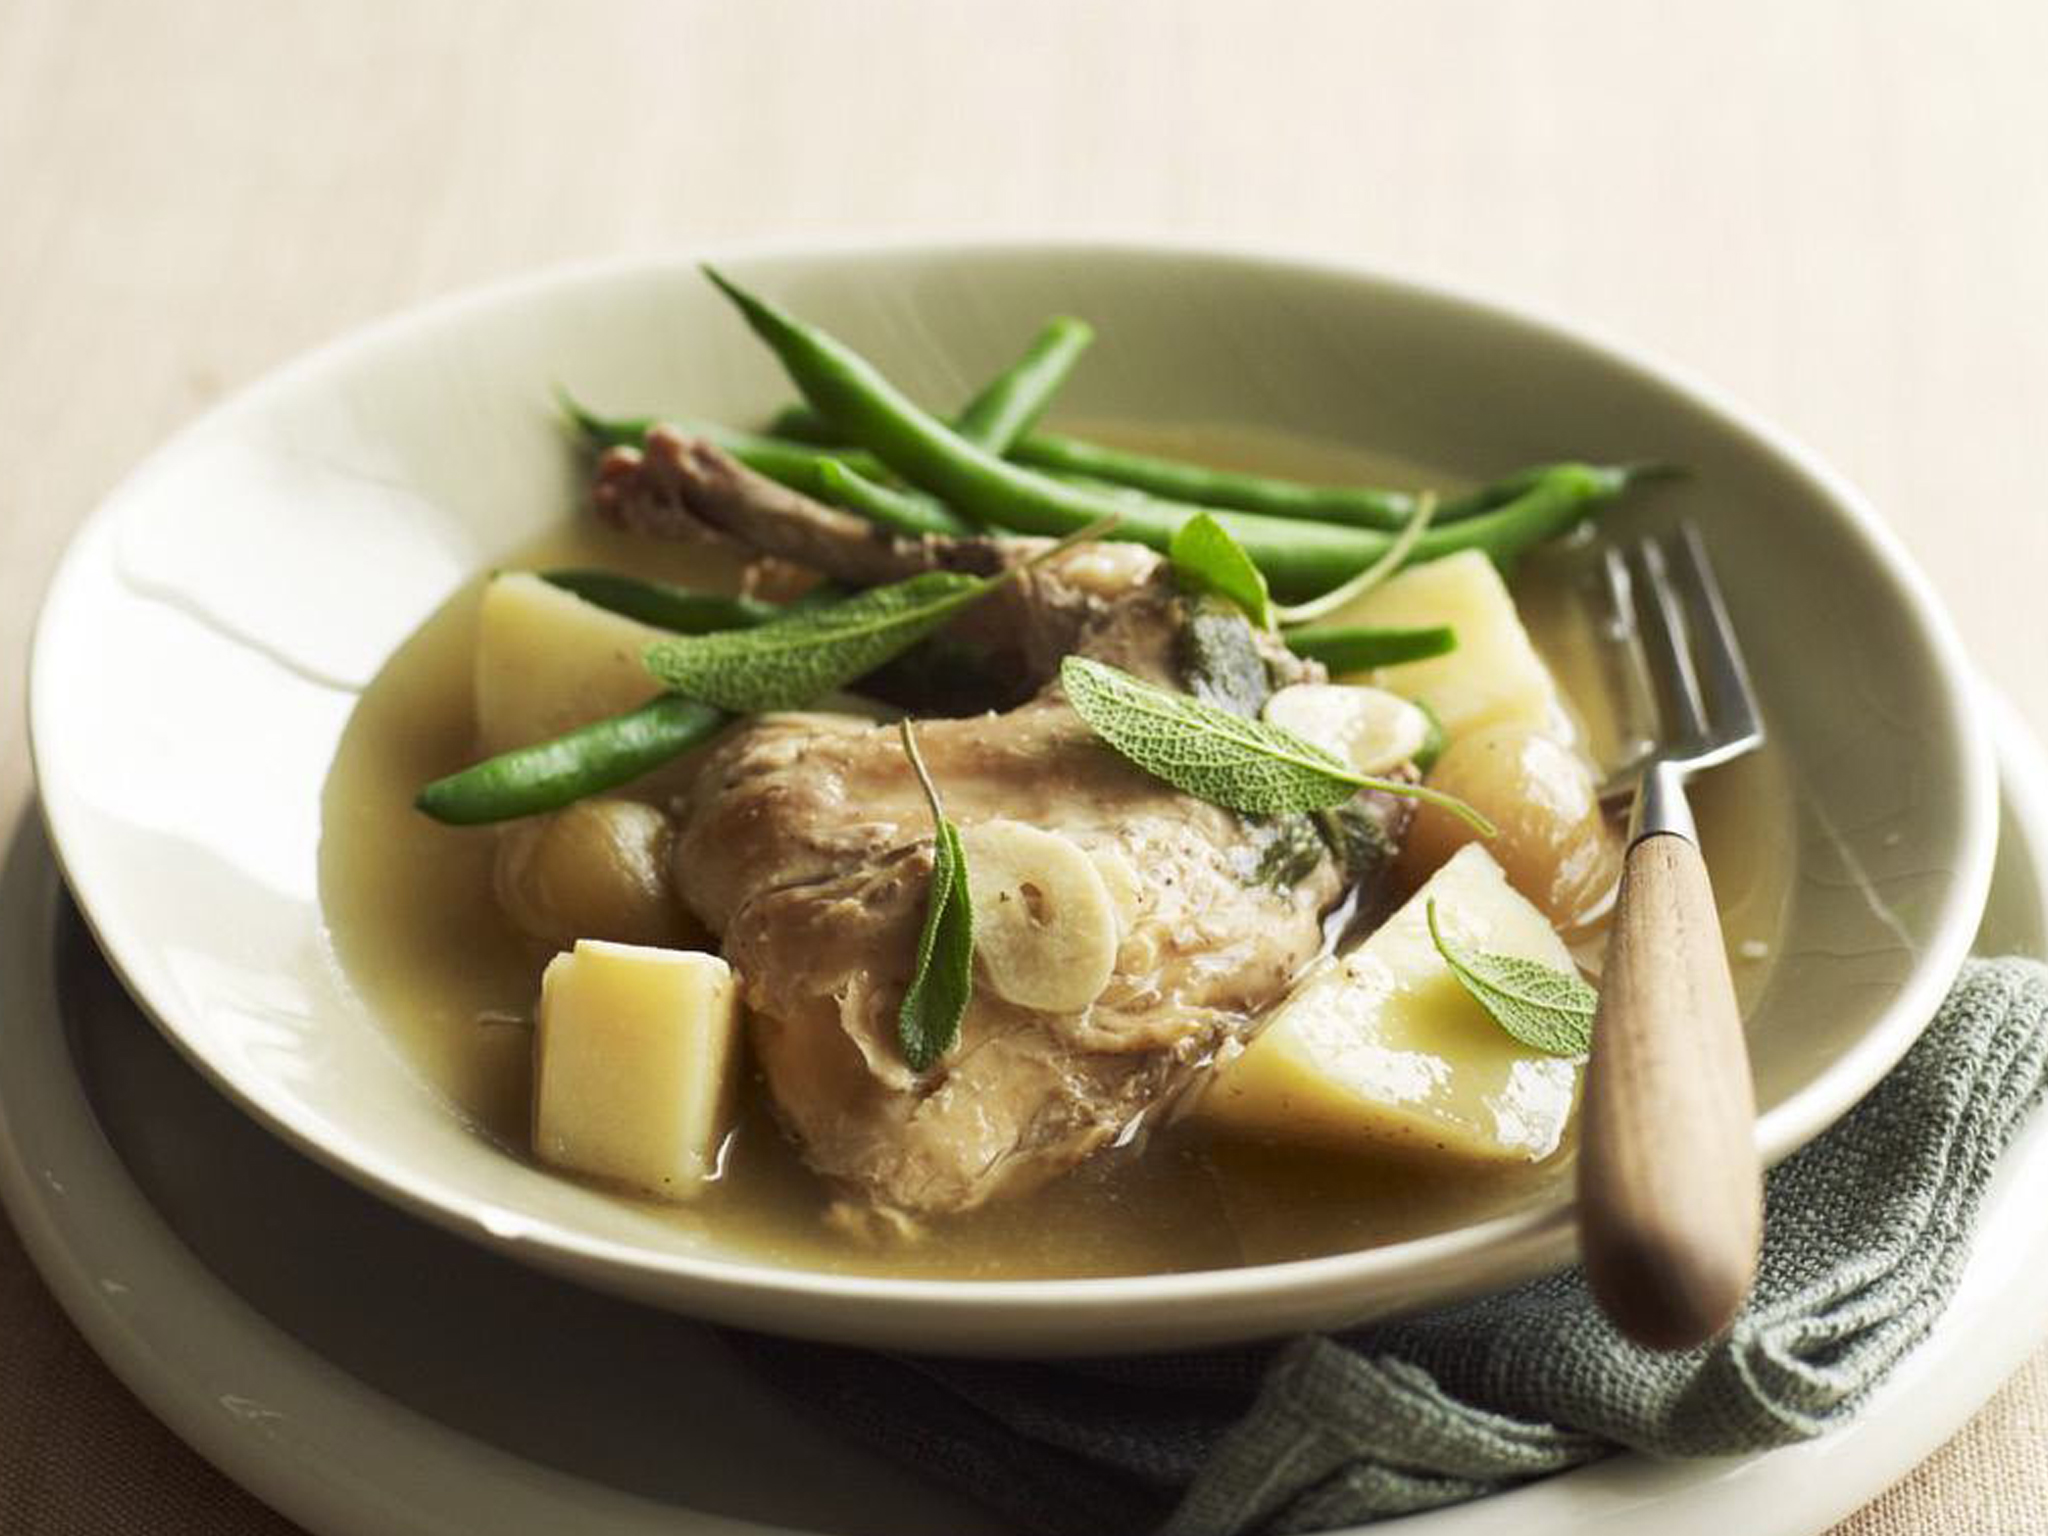 slow-cooked rabbit stew with sweet potato and sage